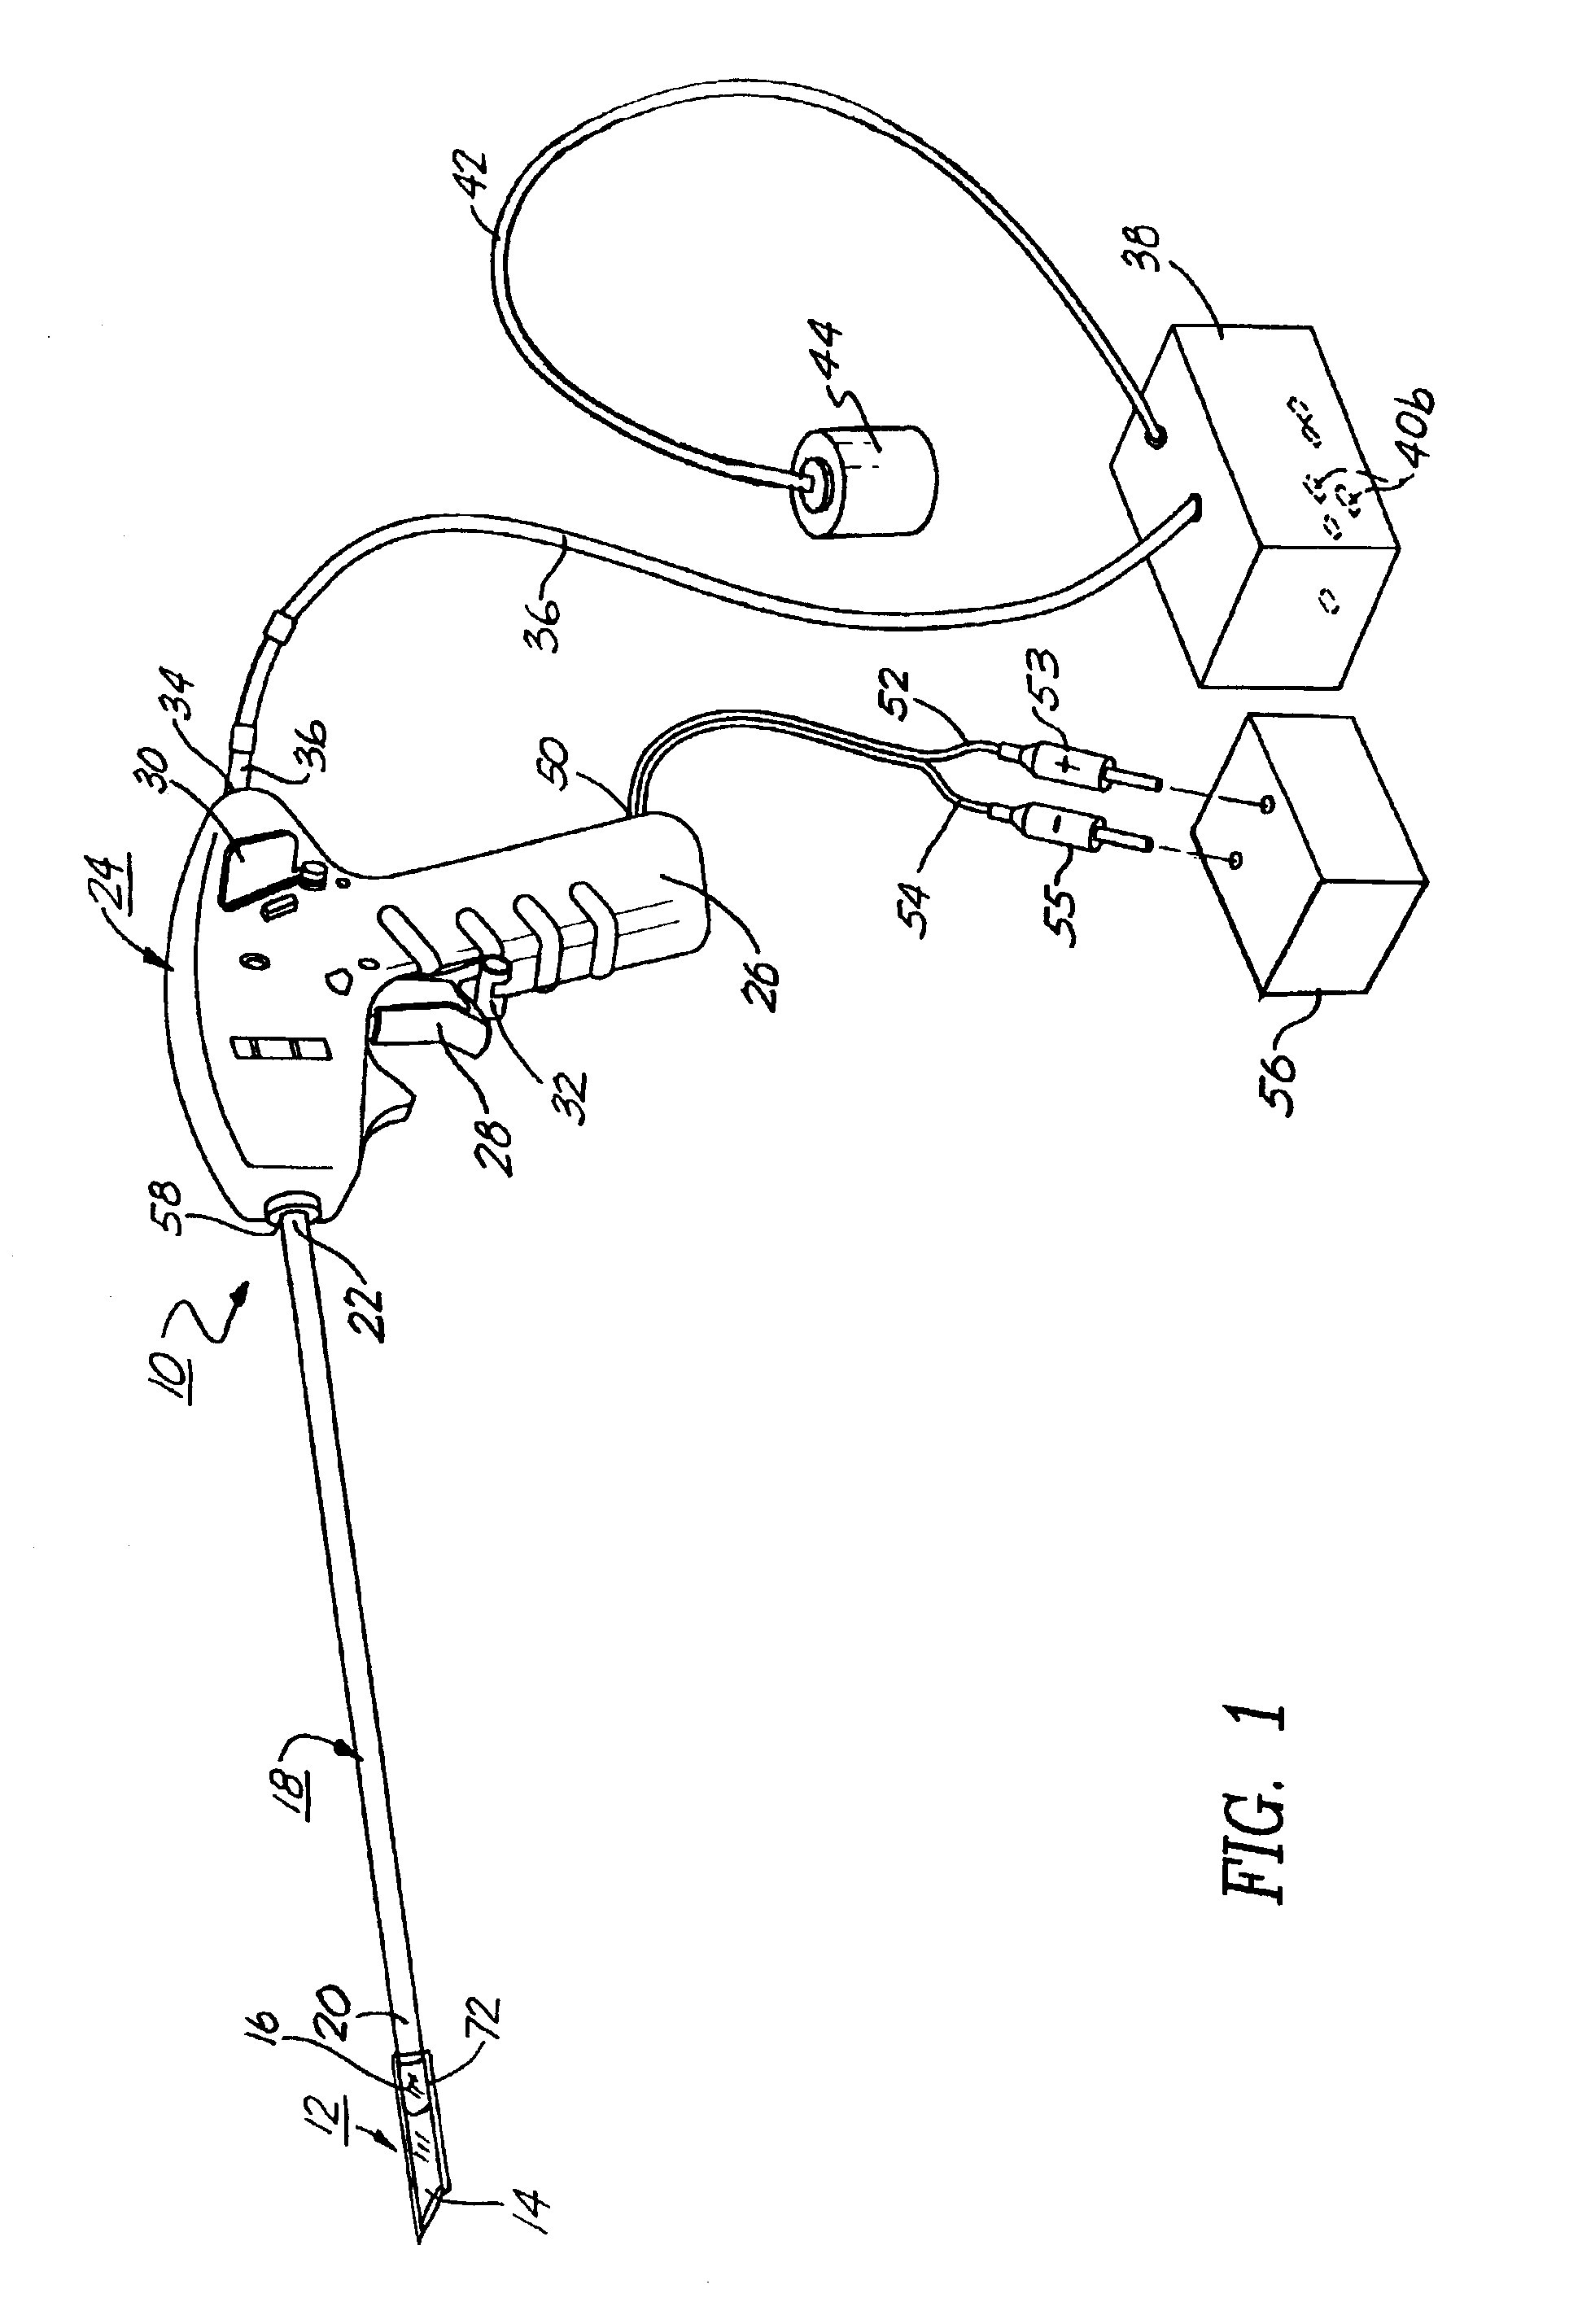 Bipolar RF excision and aspiration device and method for endometriosis removal